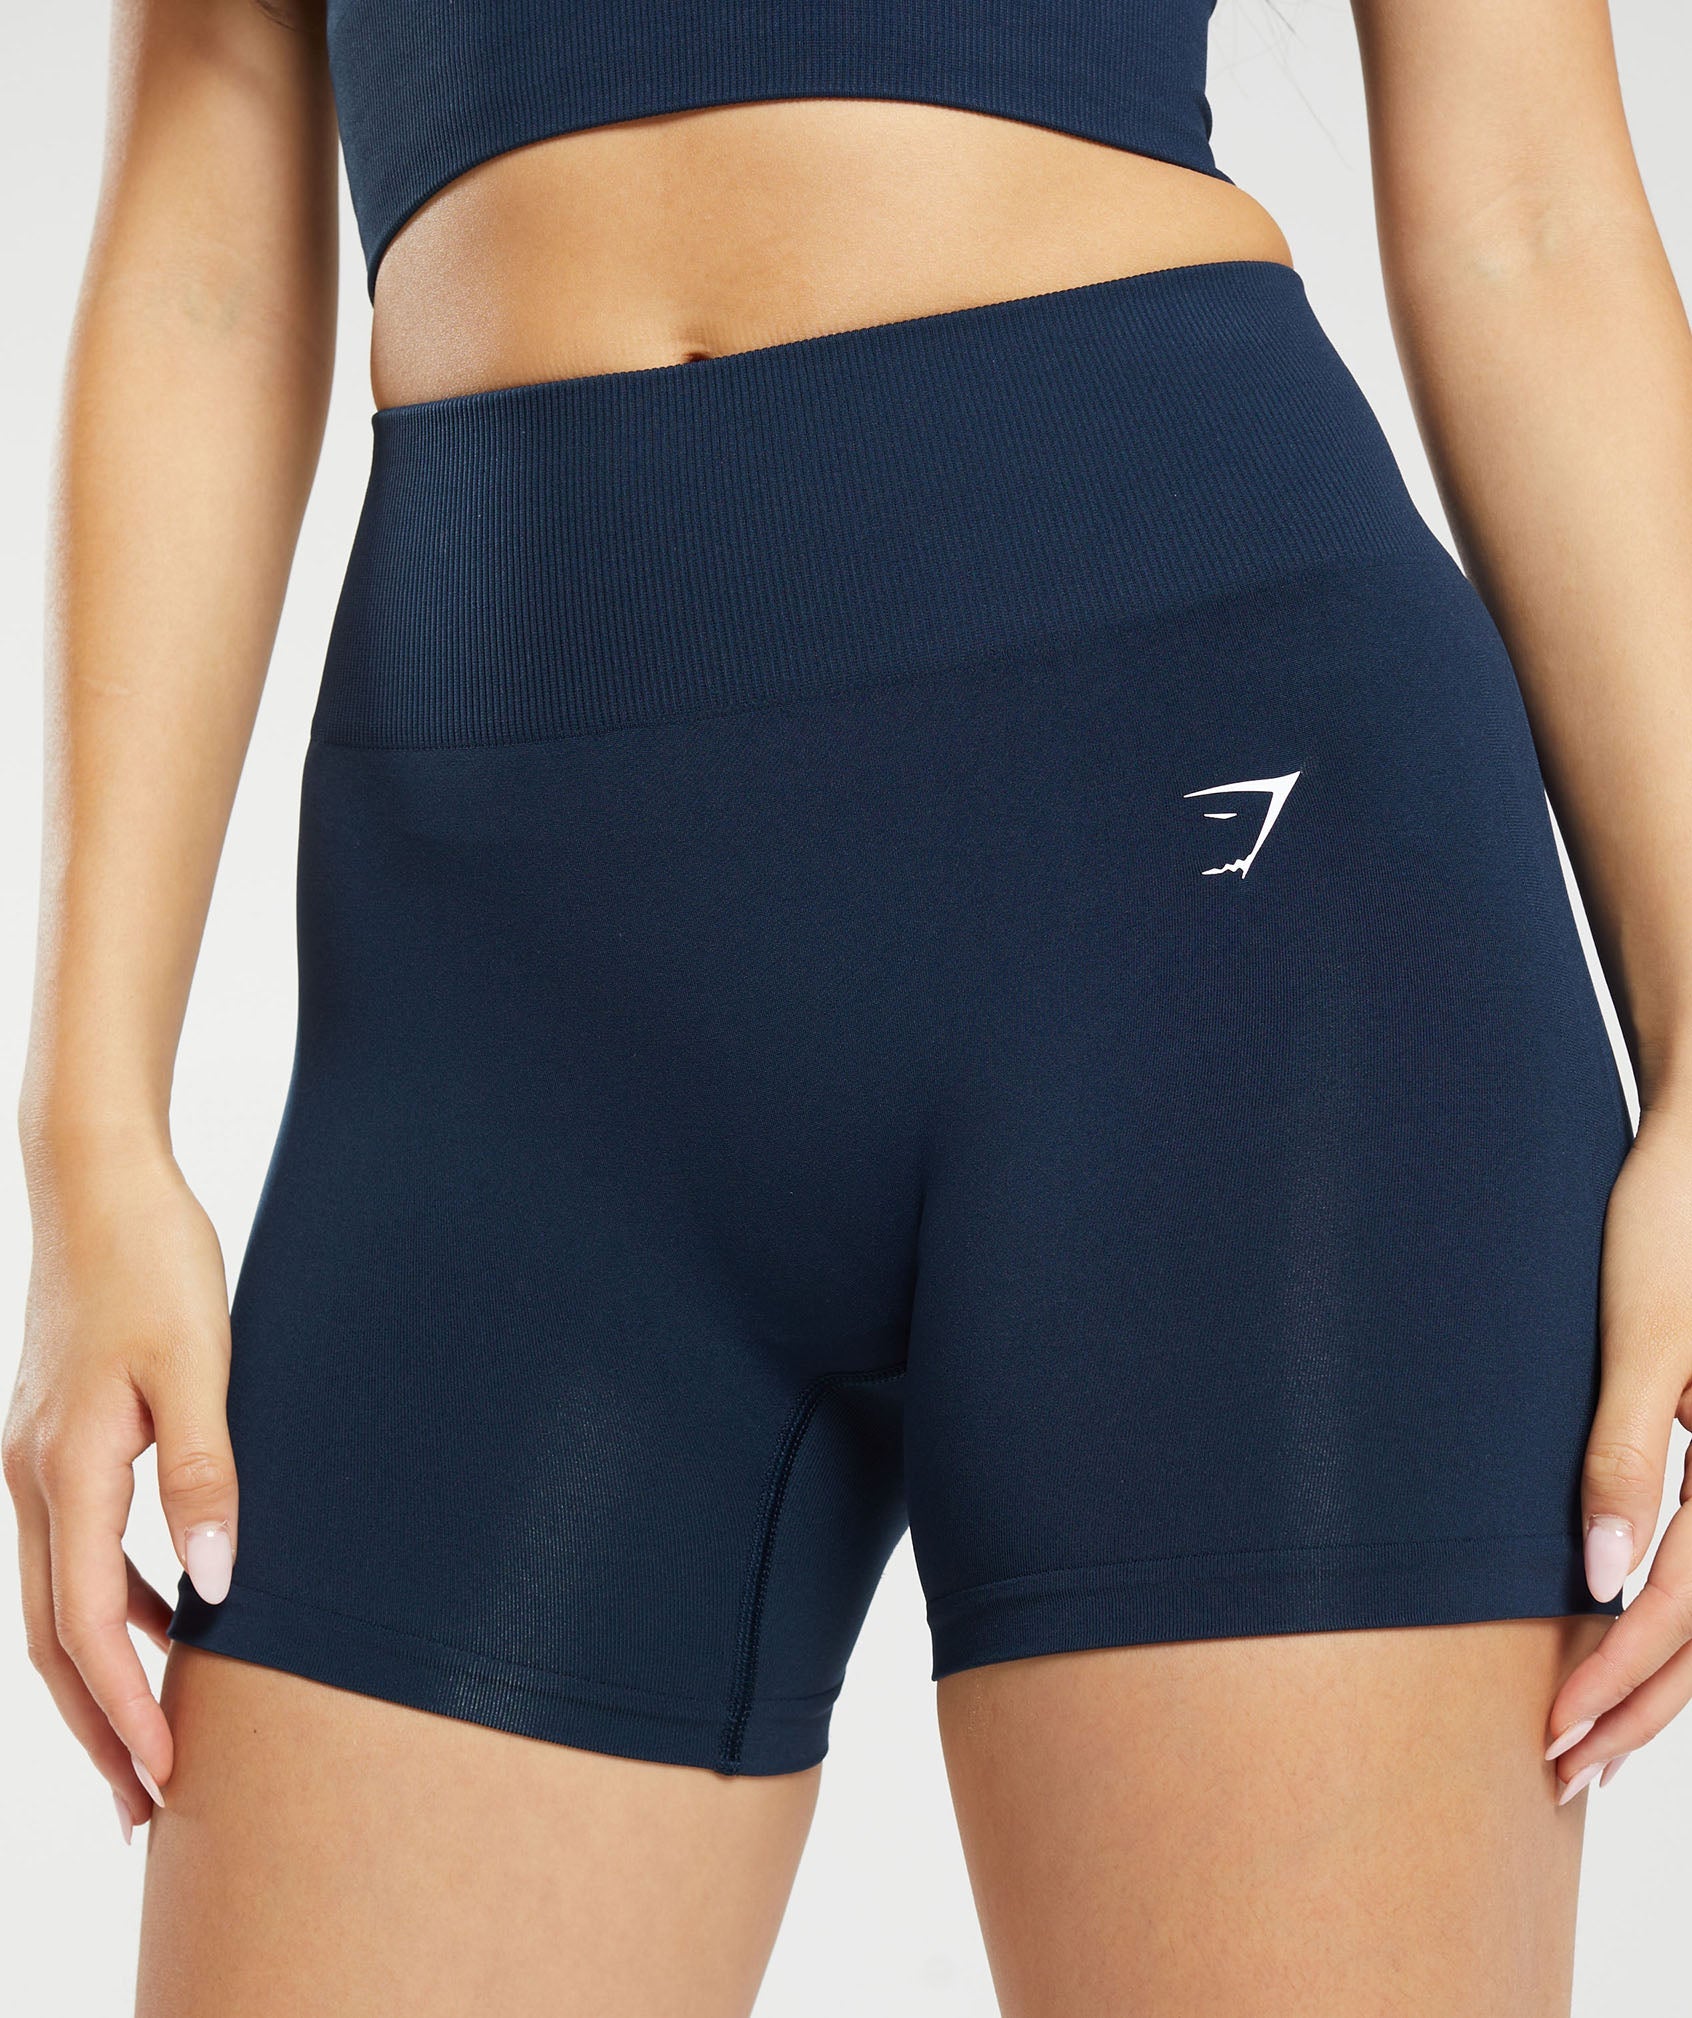 Everyday Seamless Shorts in Blue - view 6